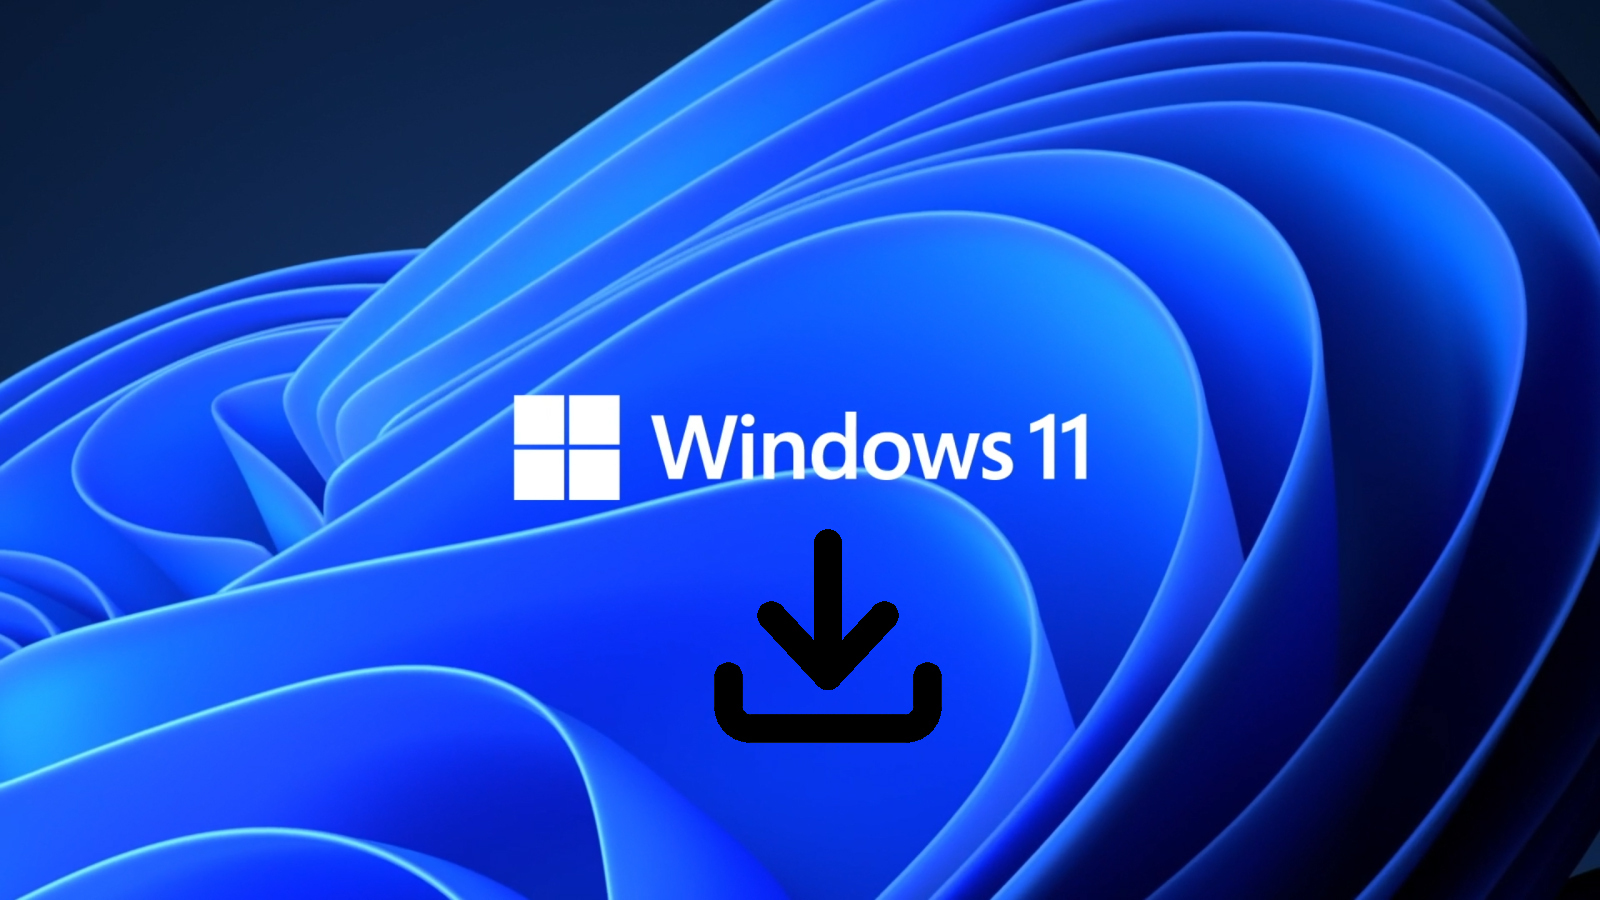 How to return to Windows 10 when Windows 11 preview doesn't work